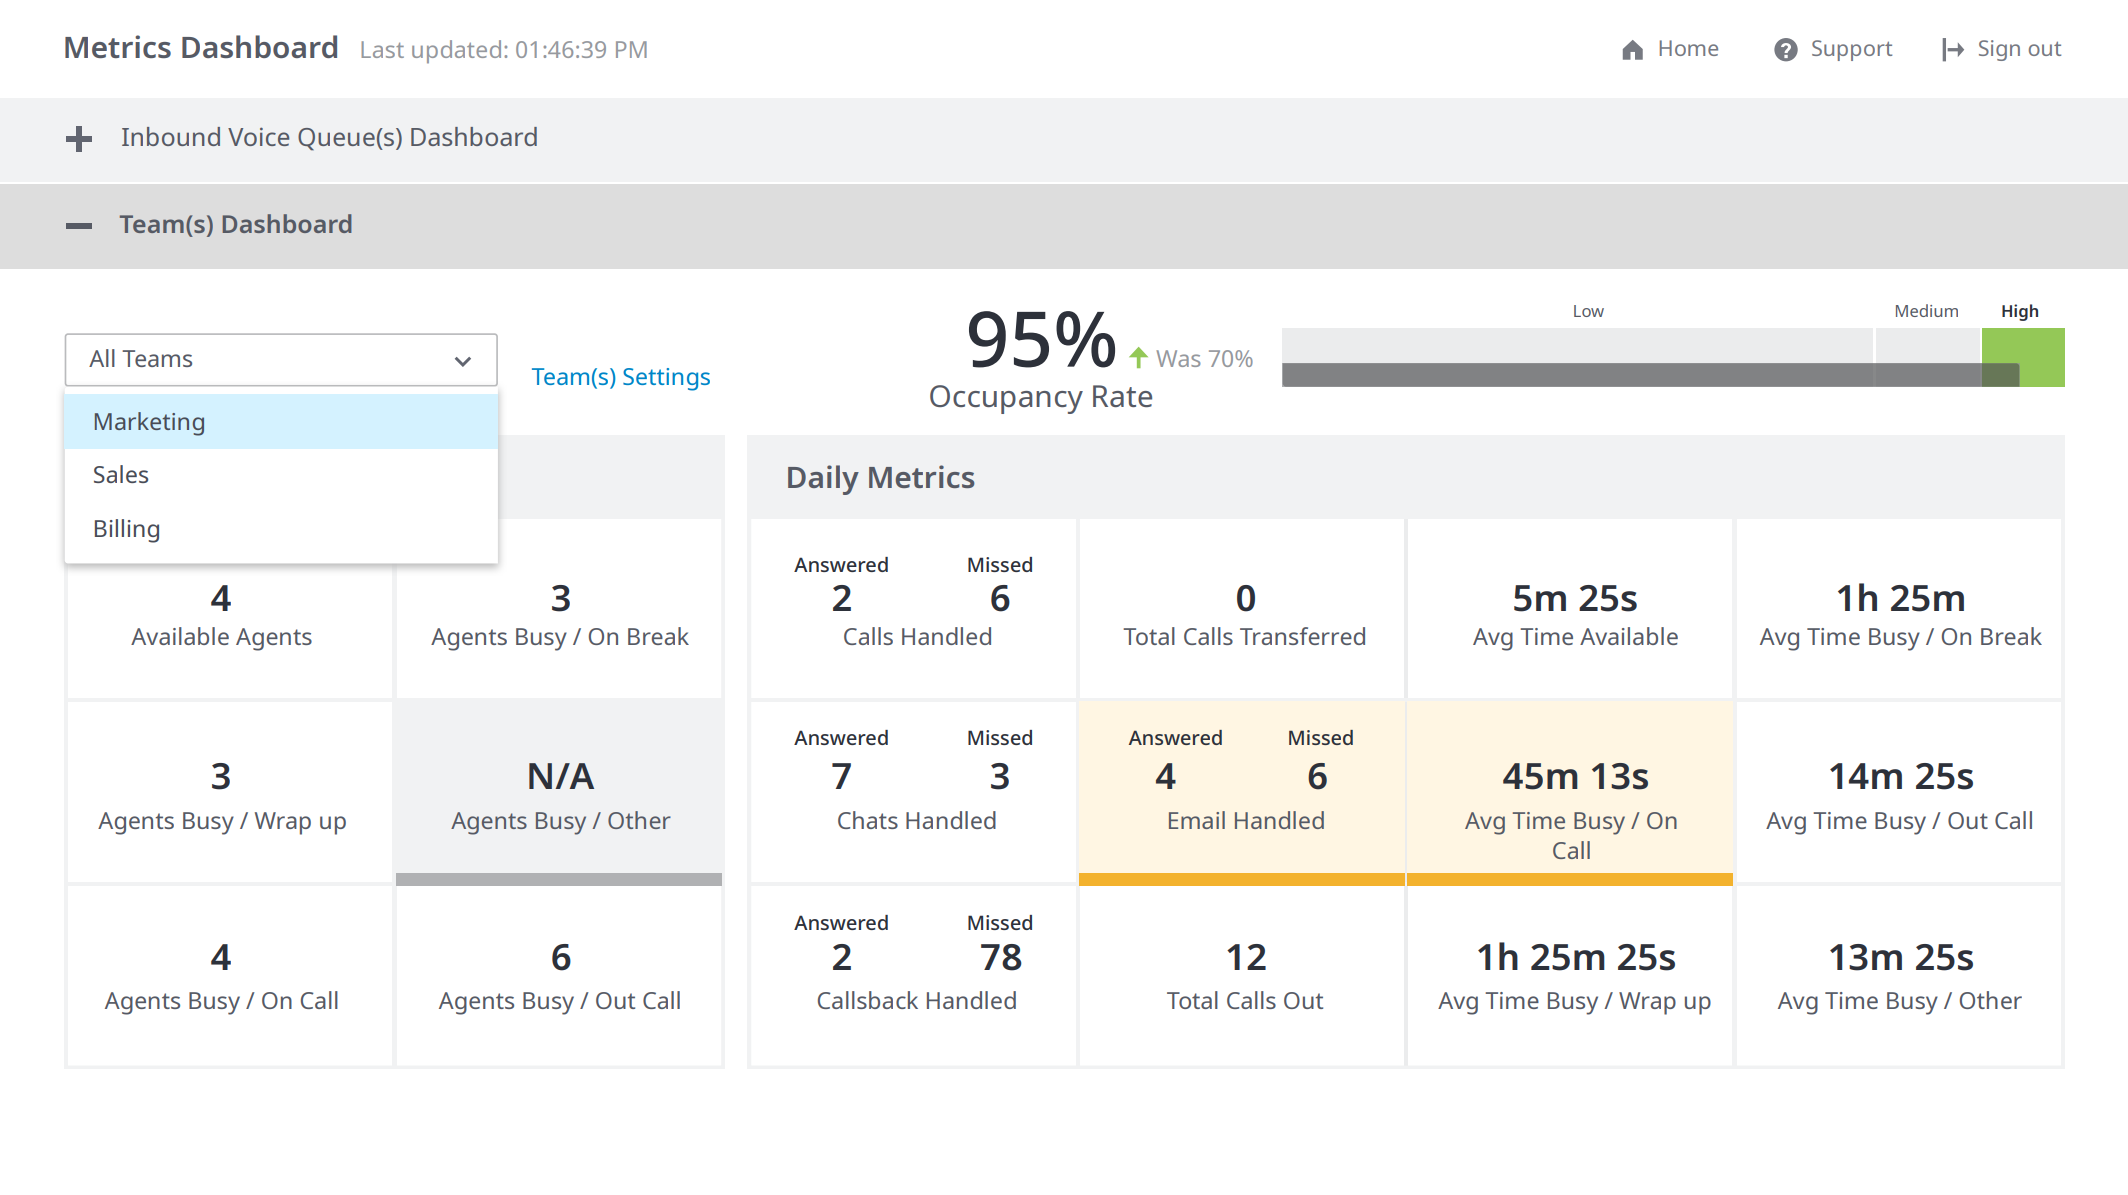 Get immediate visibility into your customer experience anywhere your team works with Intermedia dashboard.